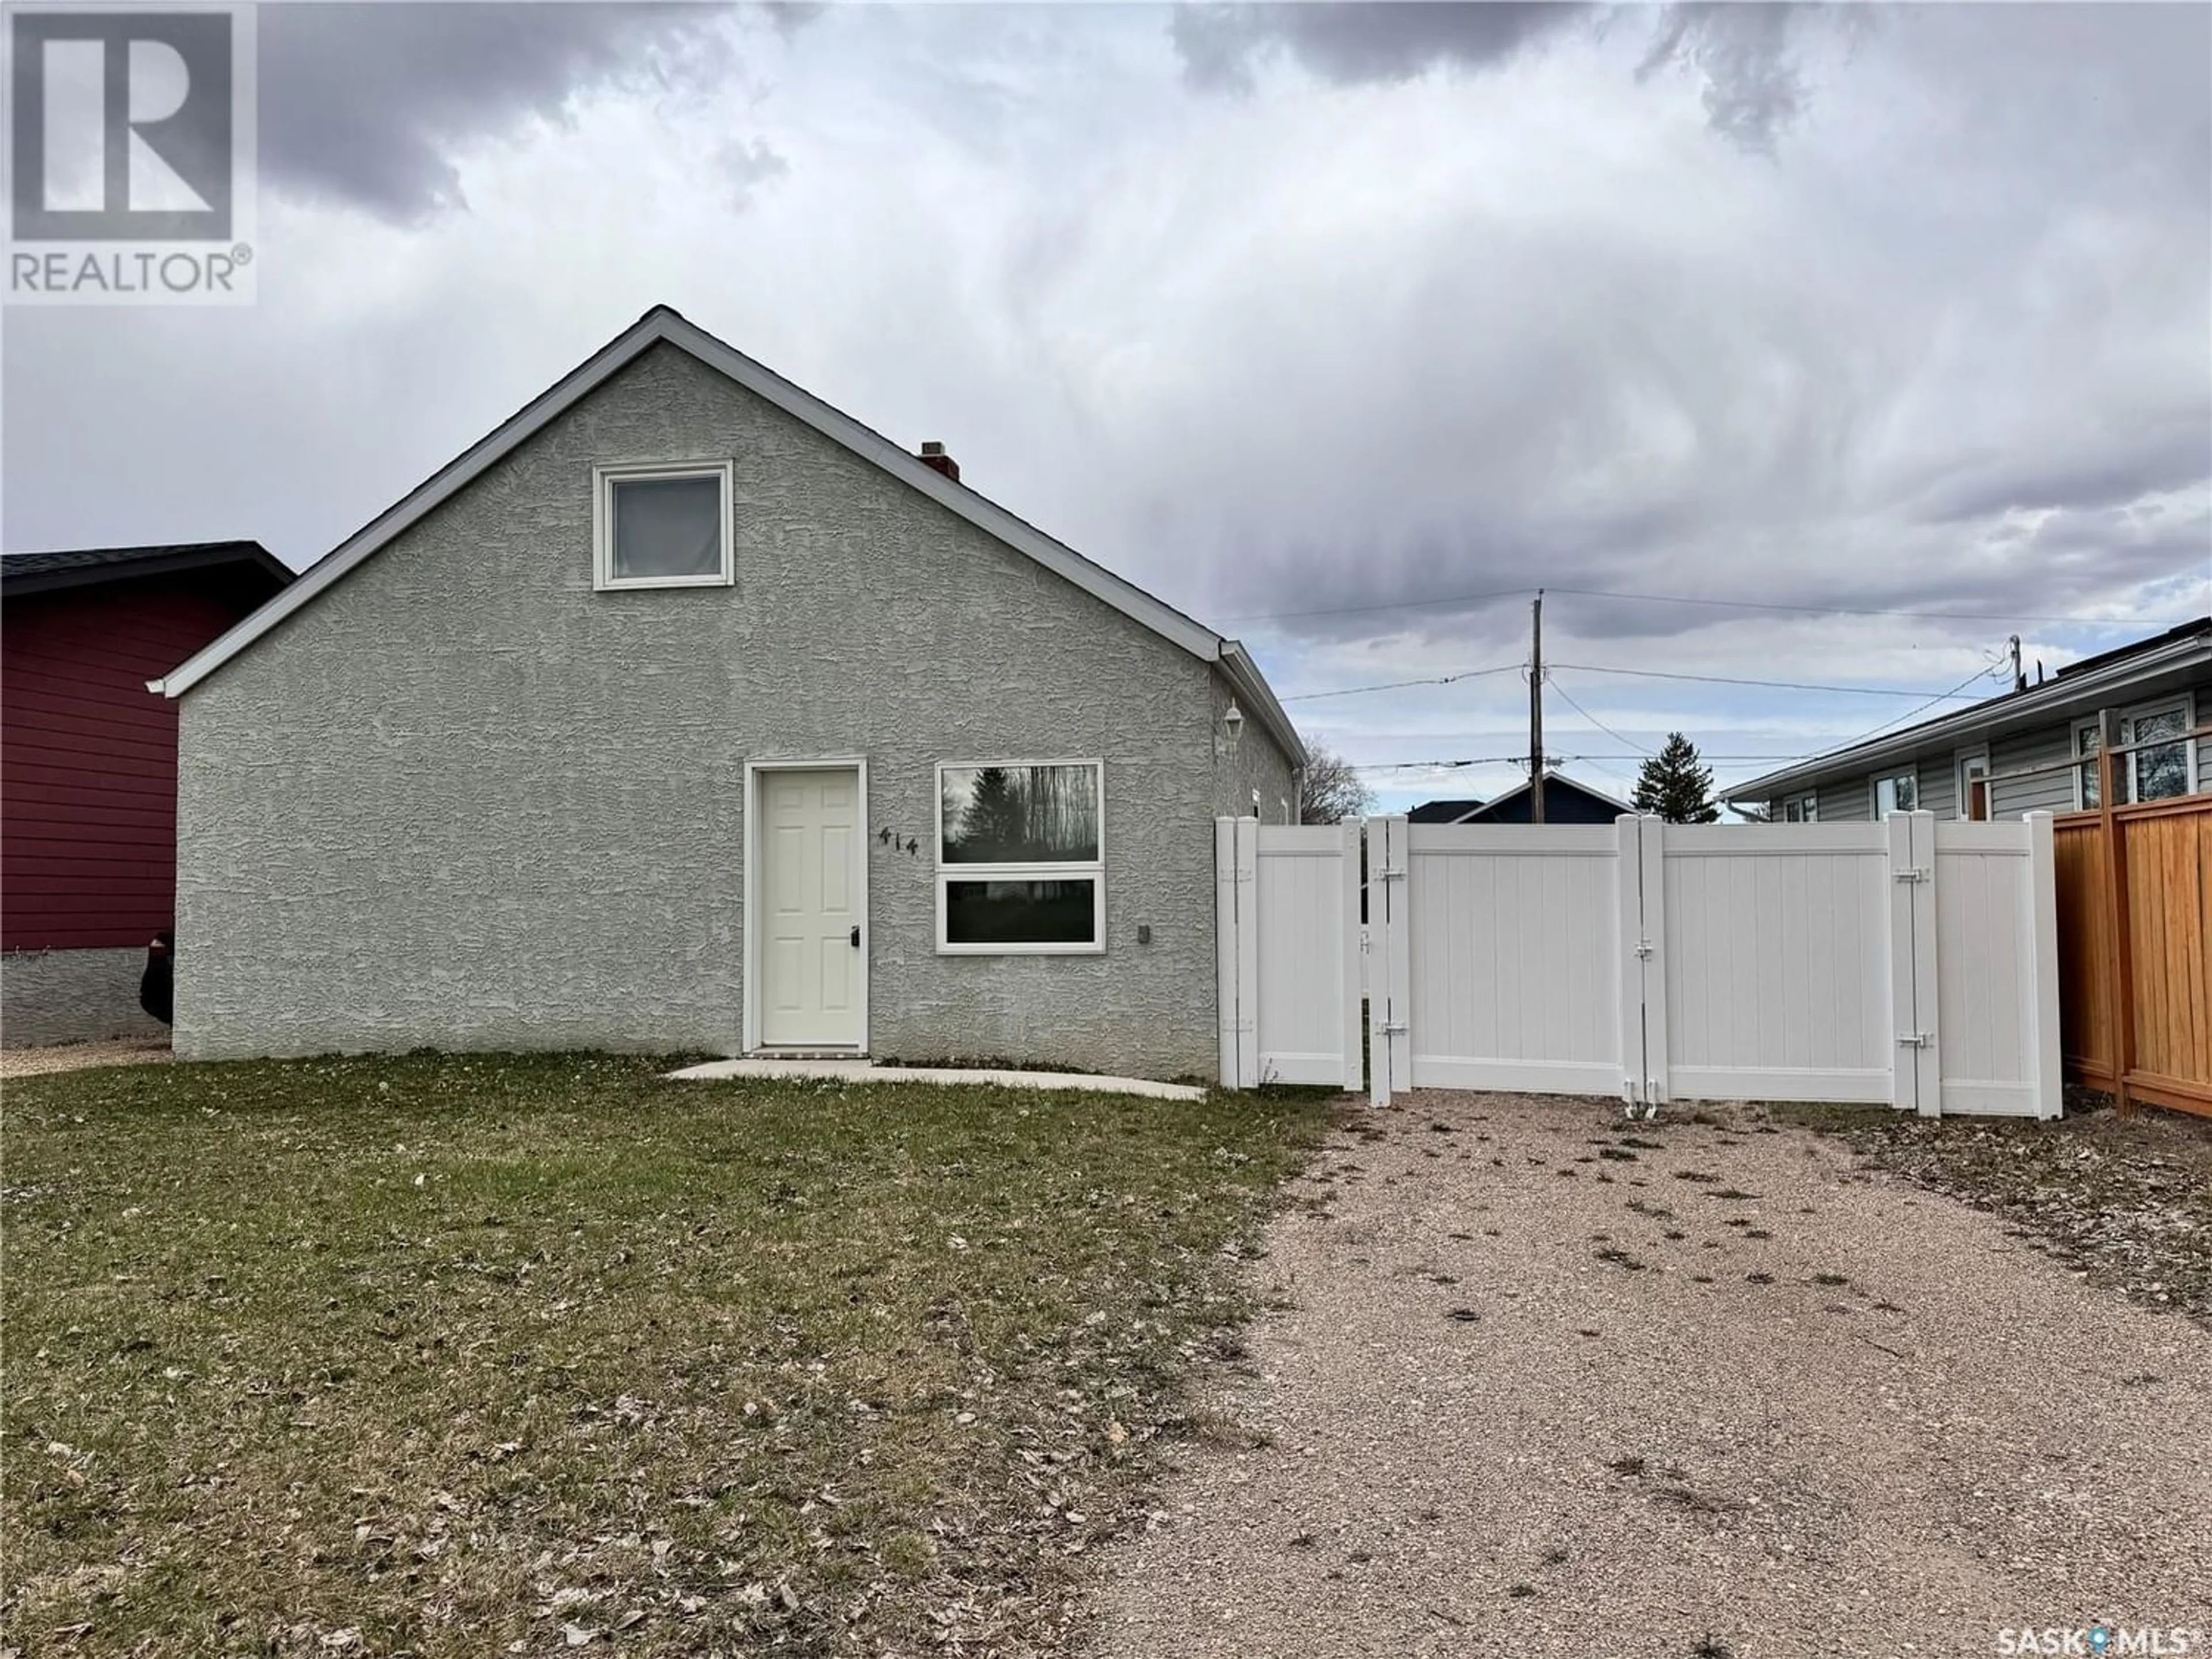 Home with unknown exterior material for 414 6th STREET E, Wynyard Saskatchewan S0A4T0